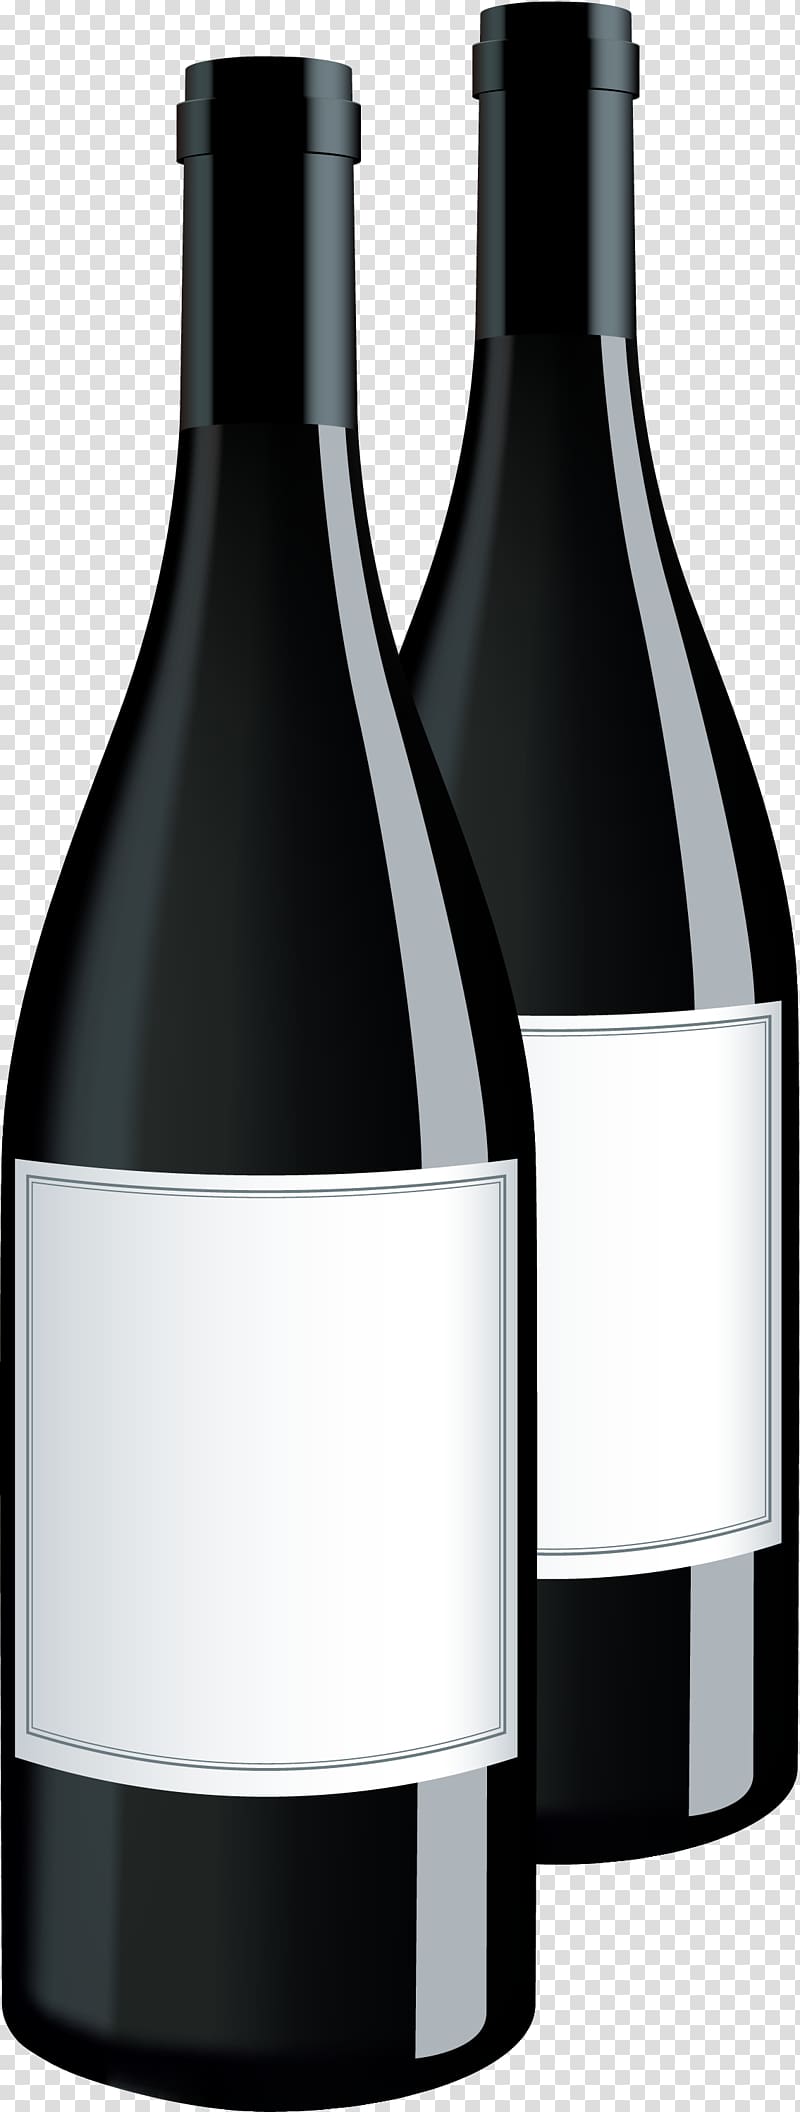 Red Wine Rosxe9 Terratico di Bibbona Bottle, Two bottles of wine transparent background PNG clipart